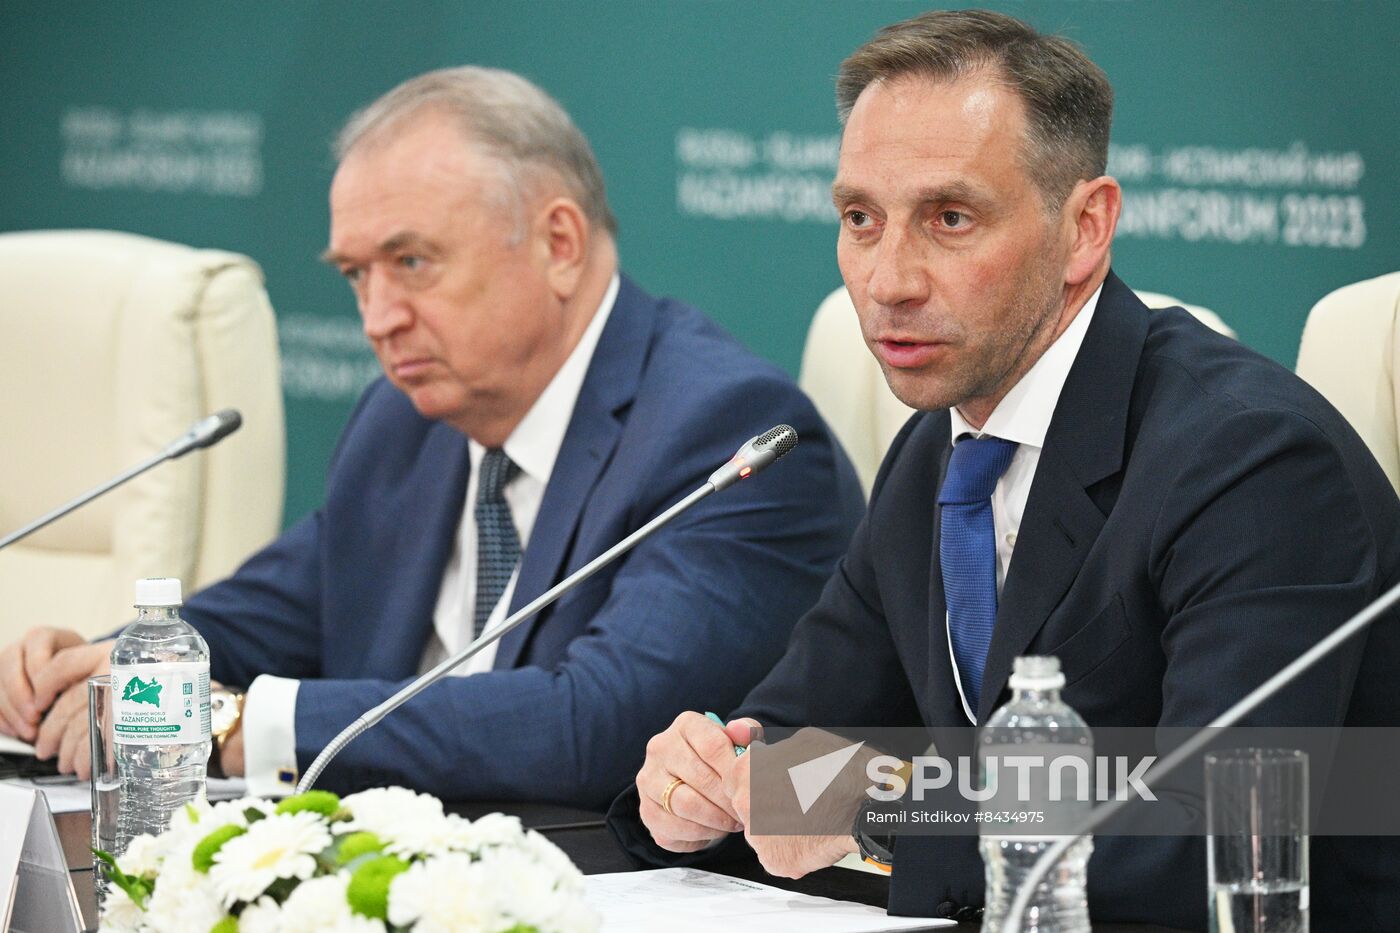 KAZANFORUM 2023. News conference following panel session of OIC chambers of commerce and industry